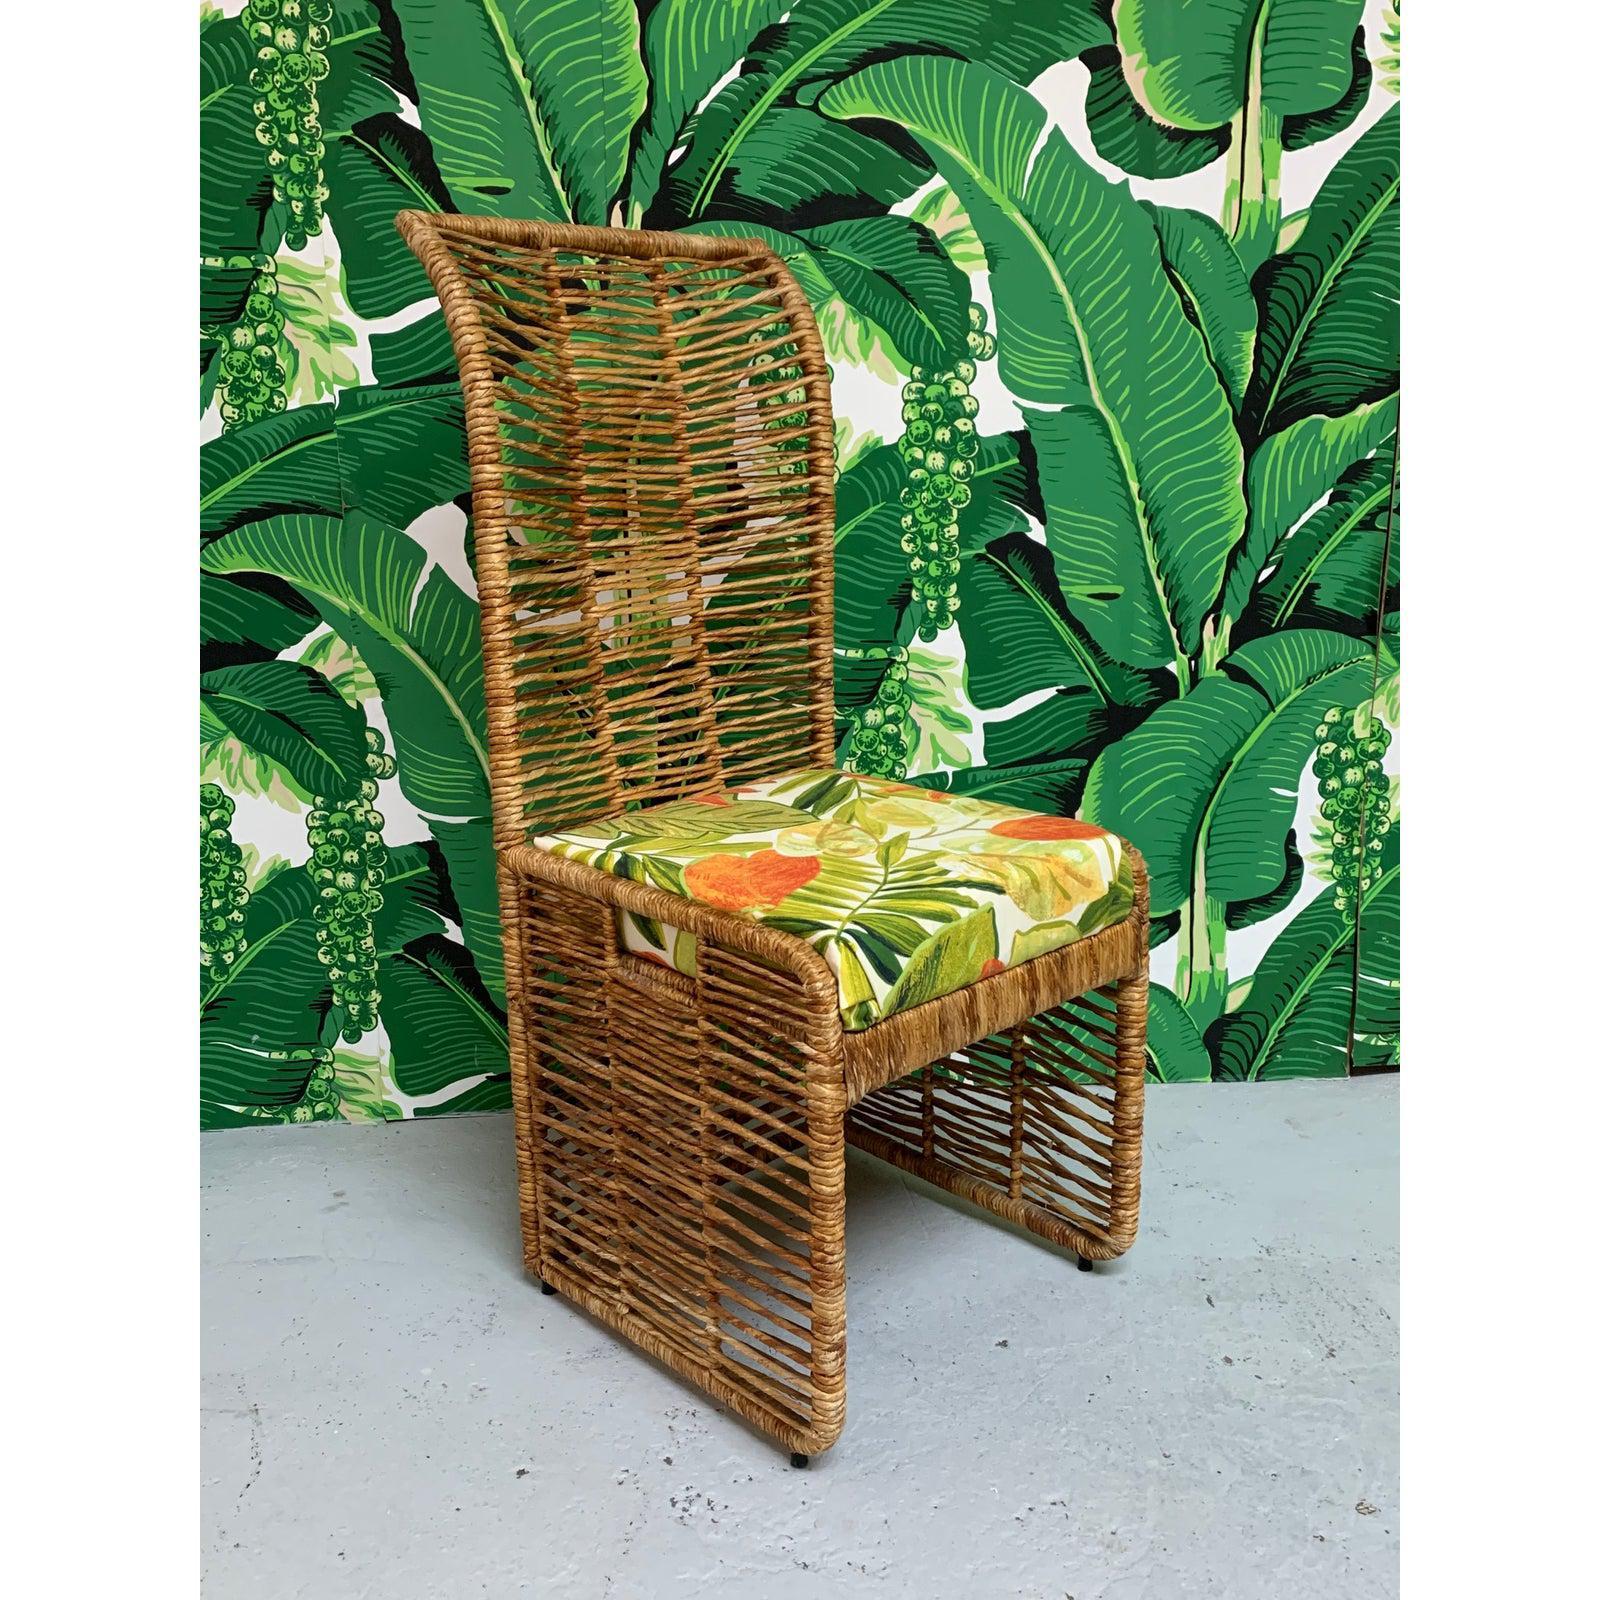 Unique tiki style dining set consists of 6 rattan rope wrapped dining chairs upholstered in a tropical palm leaf print and matching pedestal table with glass top. Steel frame construction, heavy and sturdy. Two arm chairs and four side chairs. Very